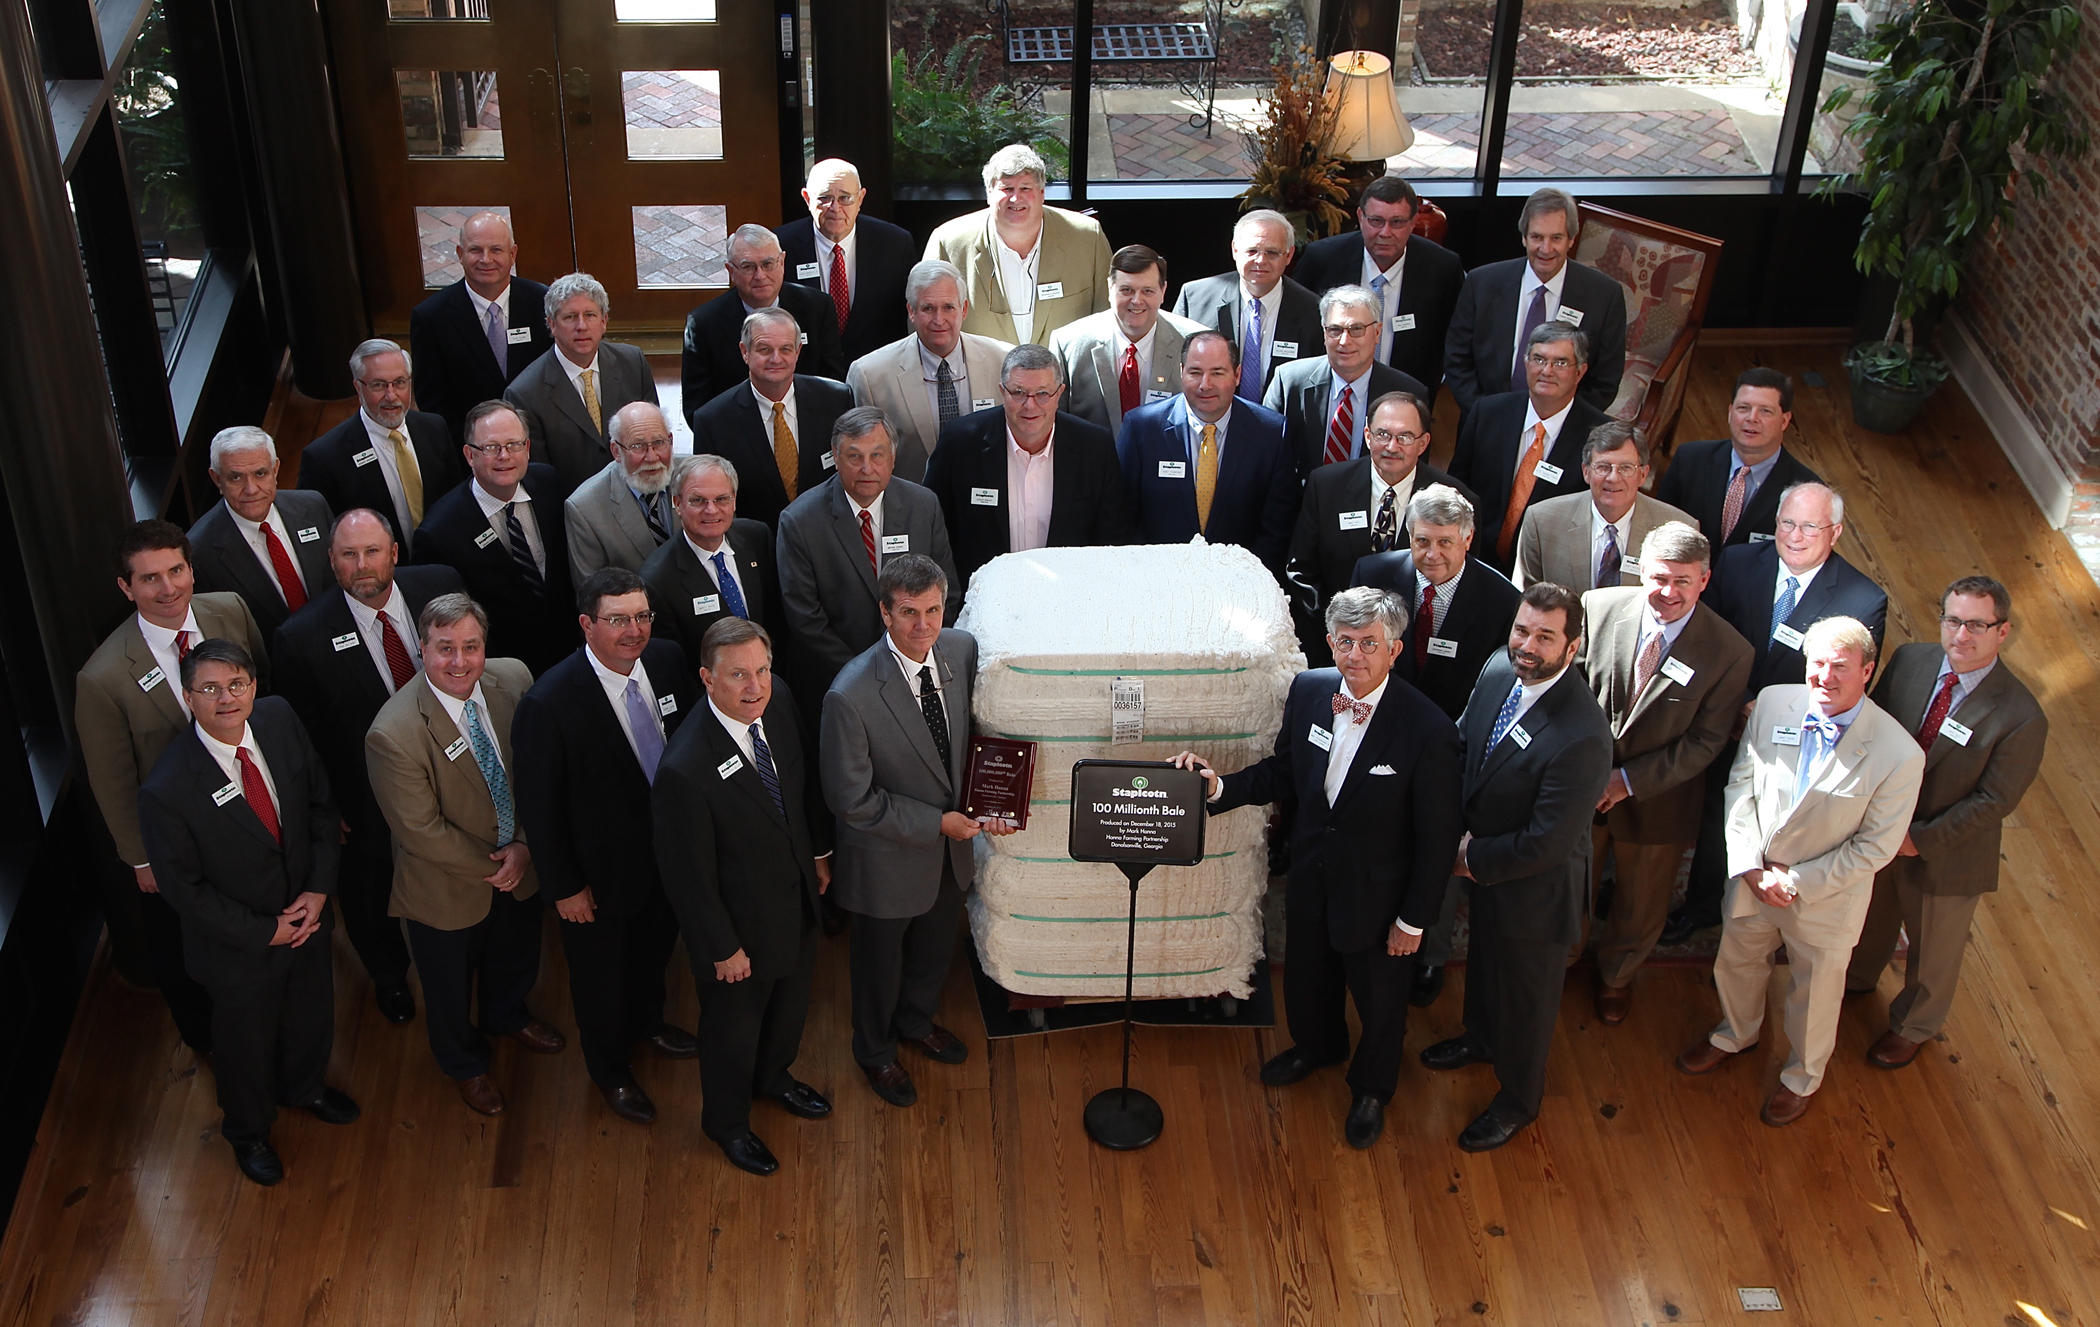 100 Millionth Bale with board and officers